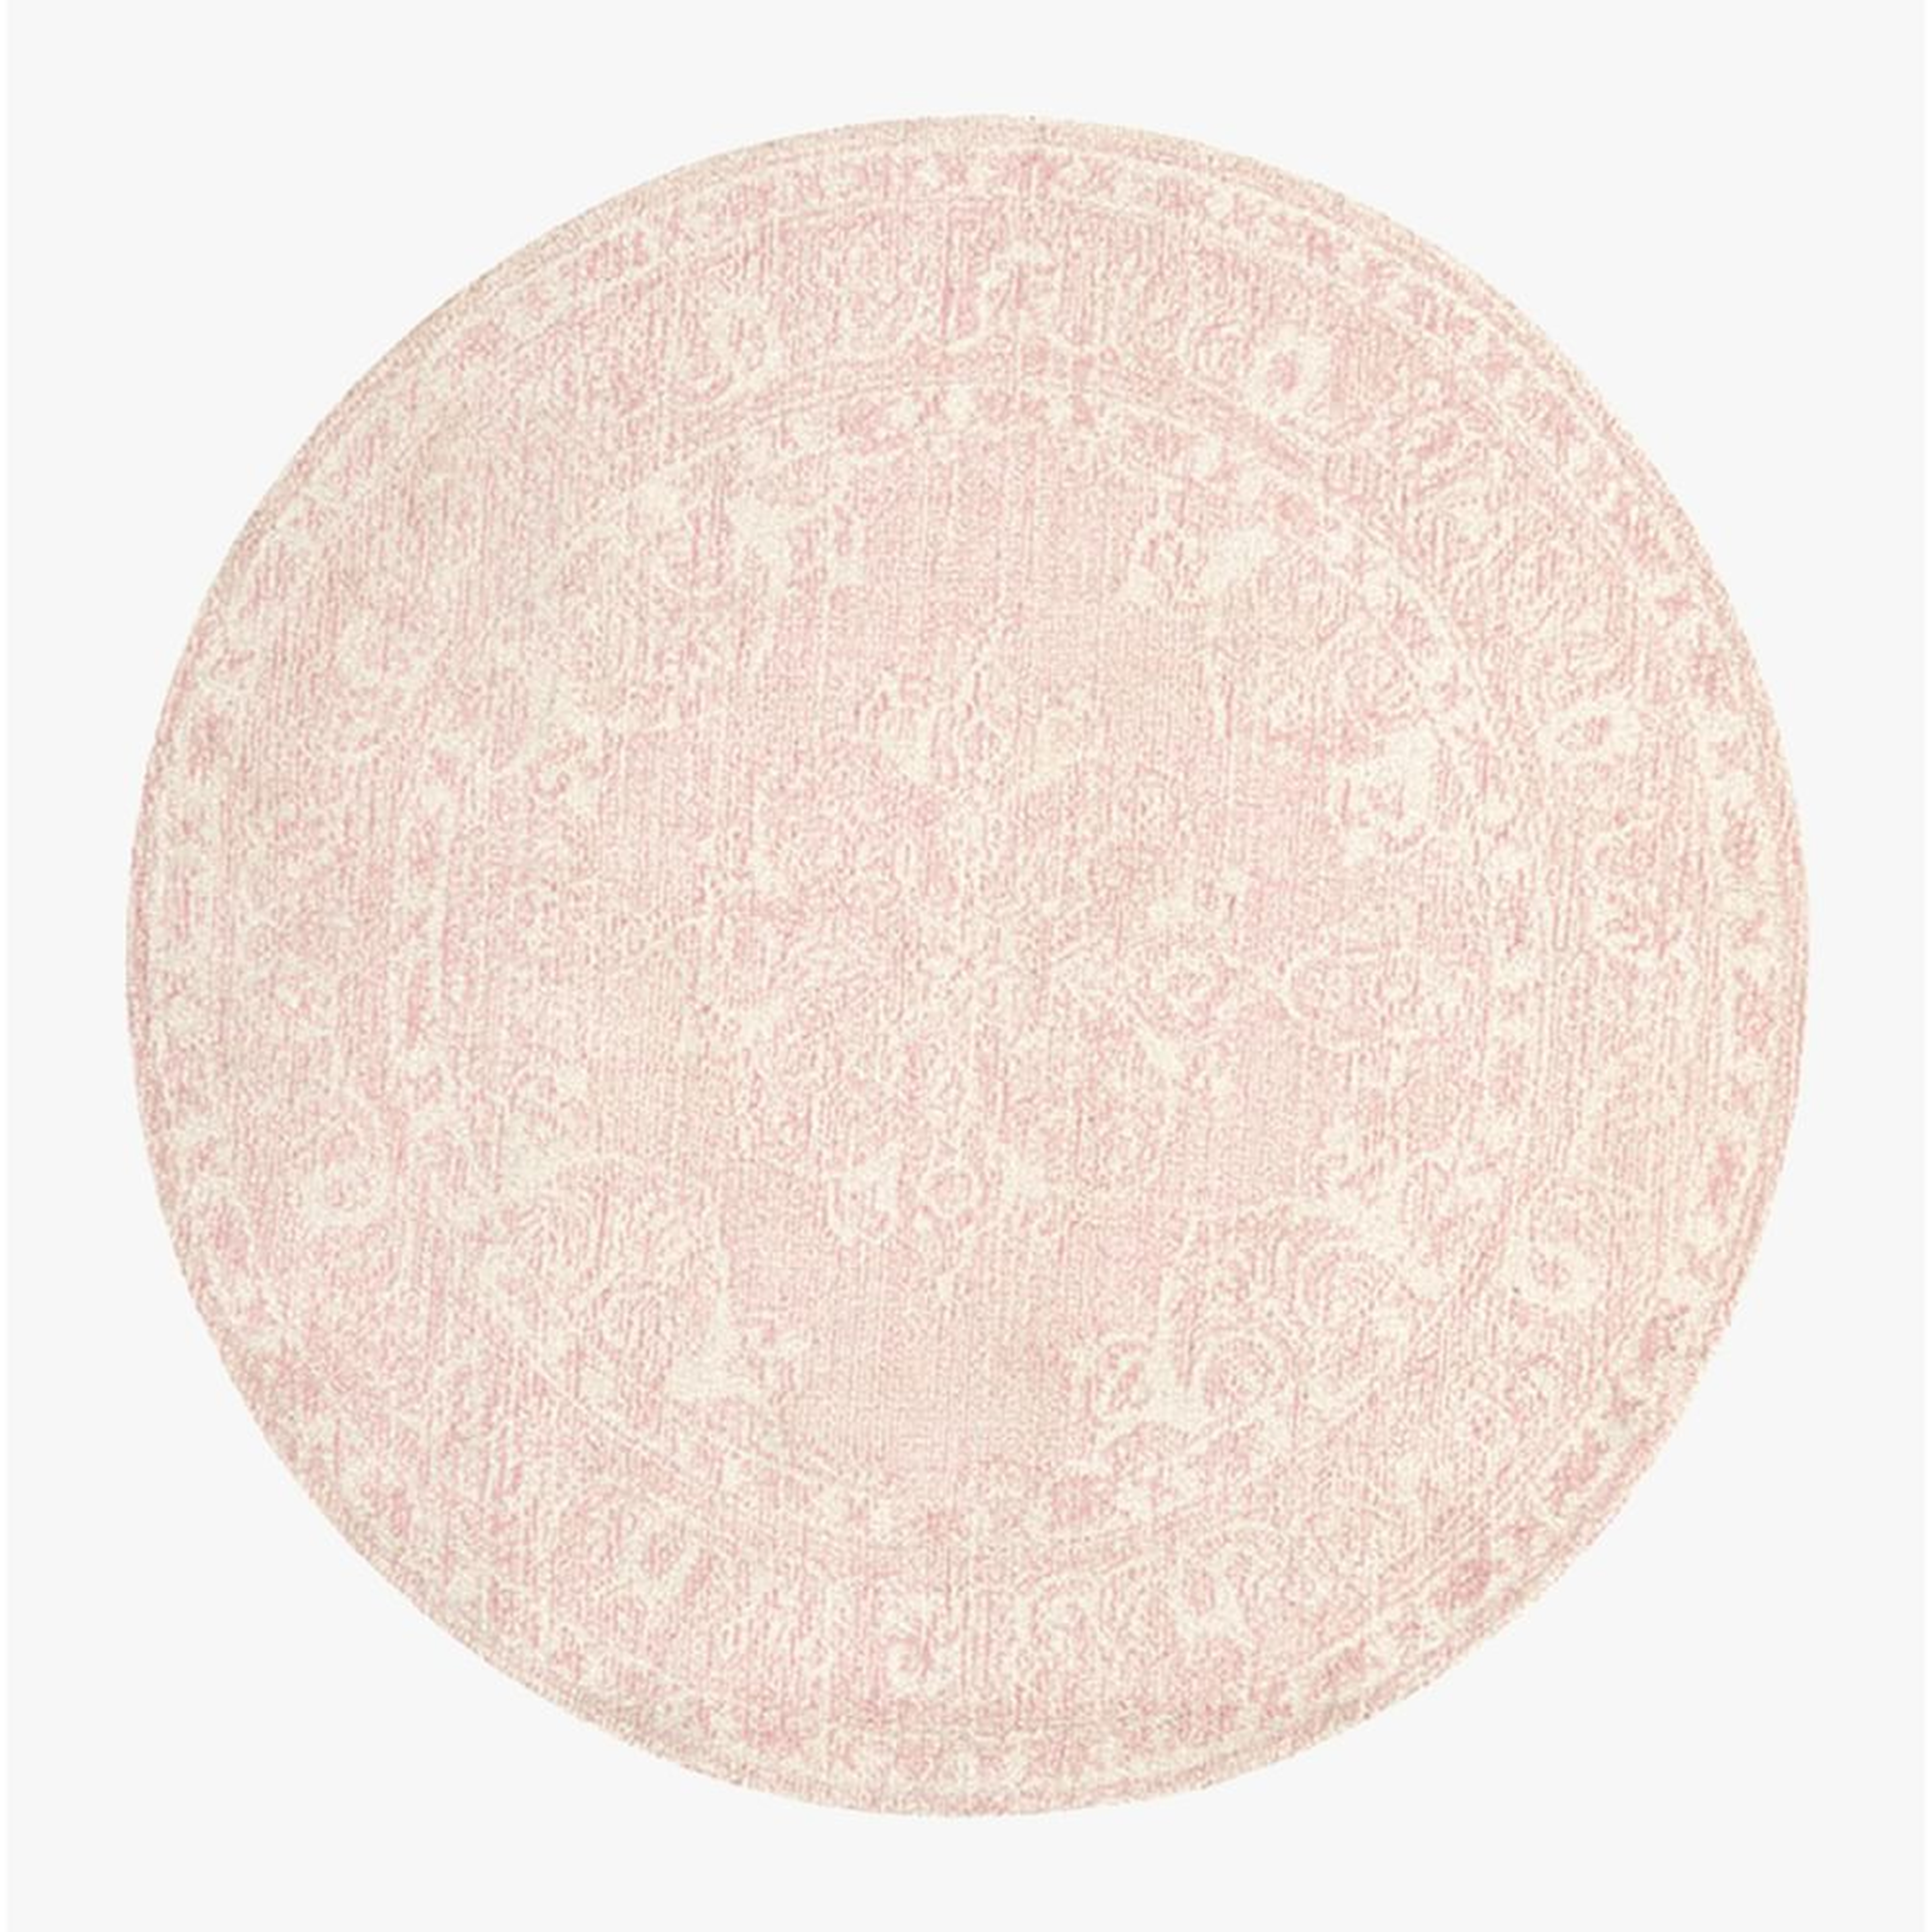 Astrid Tufted Round Rug, 5ft Round, Blush - Pottery Barn Teen